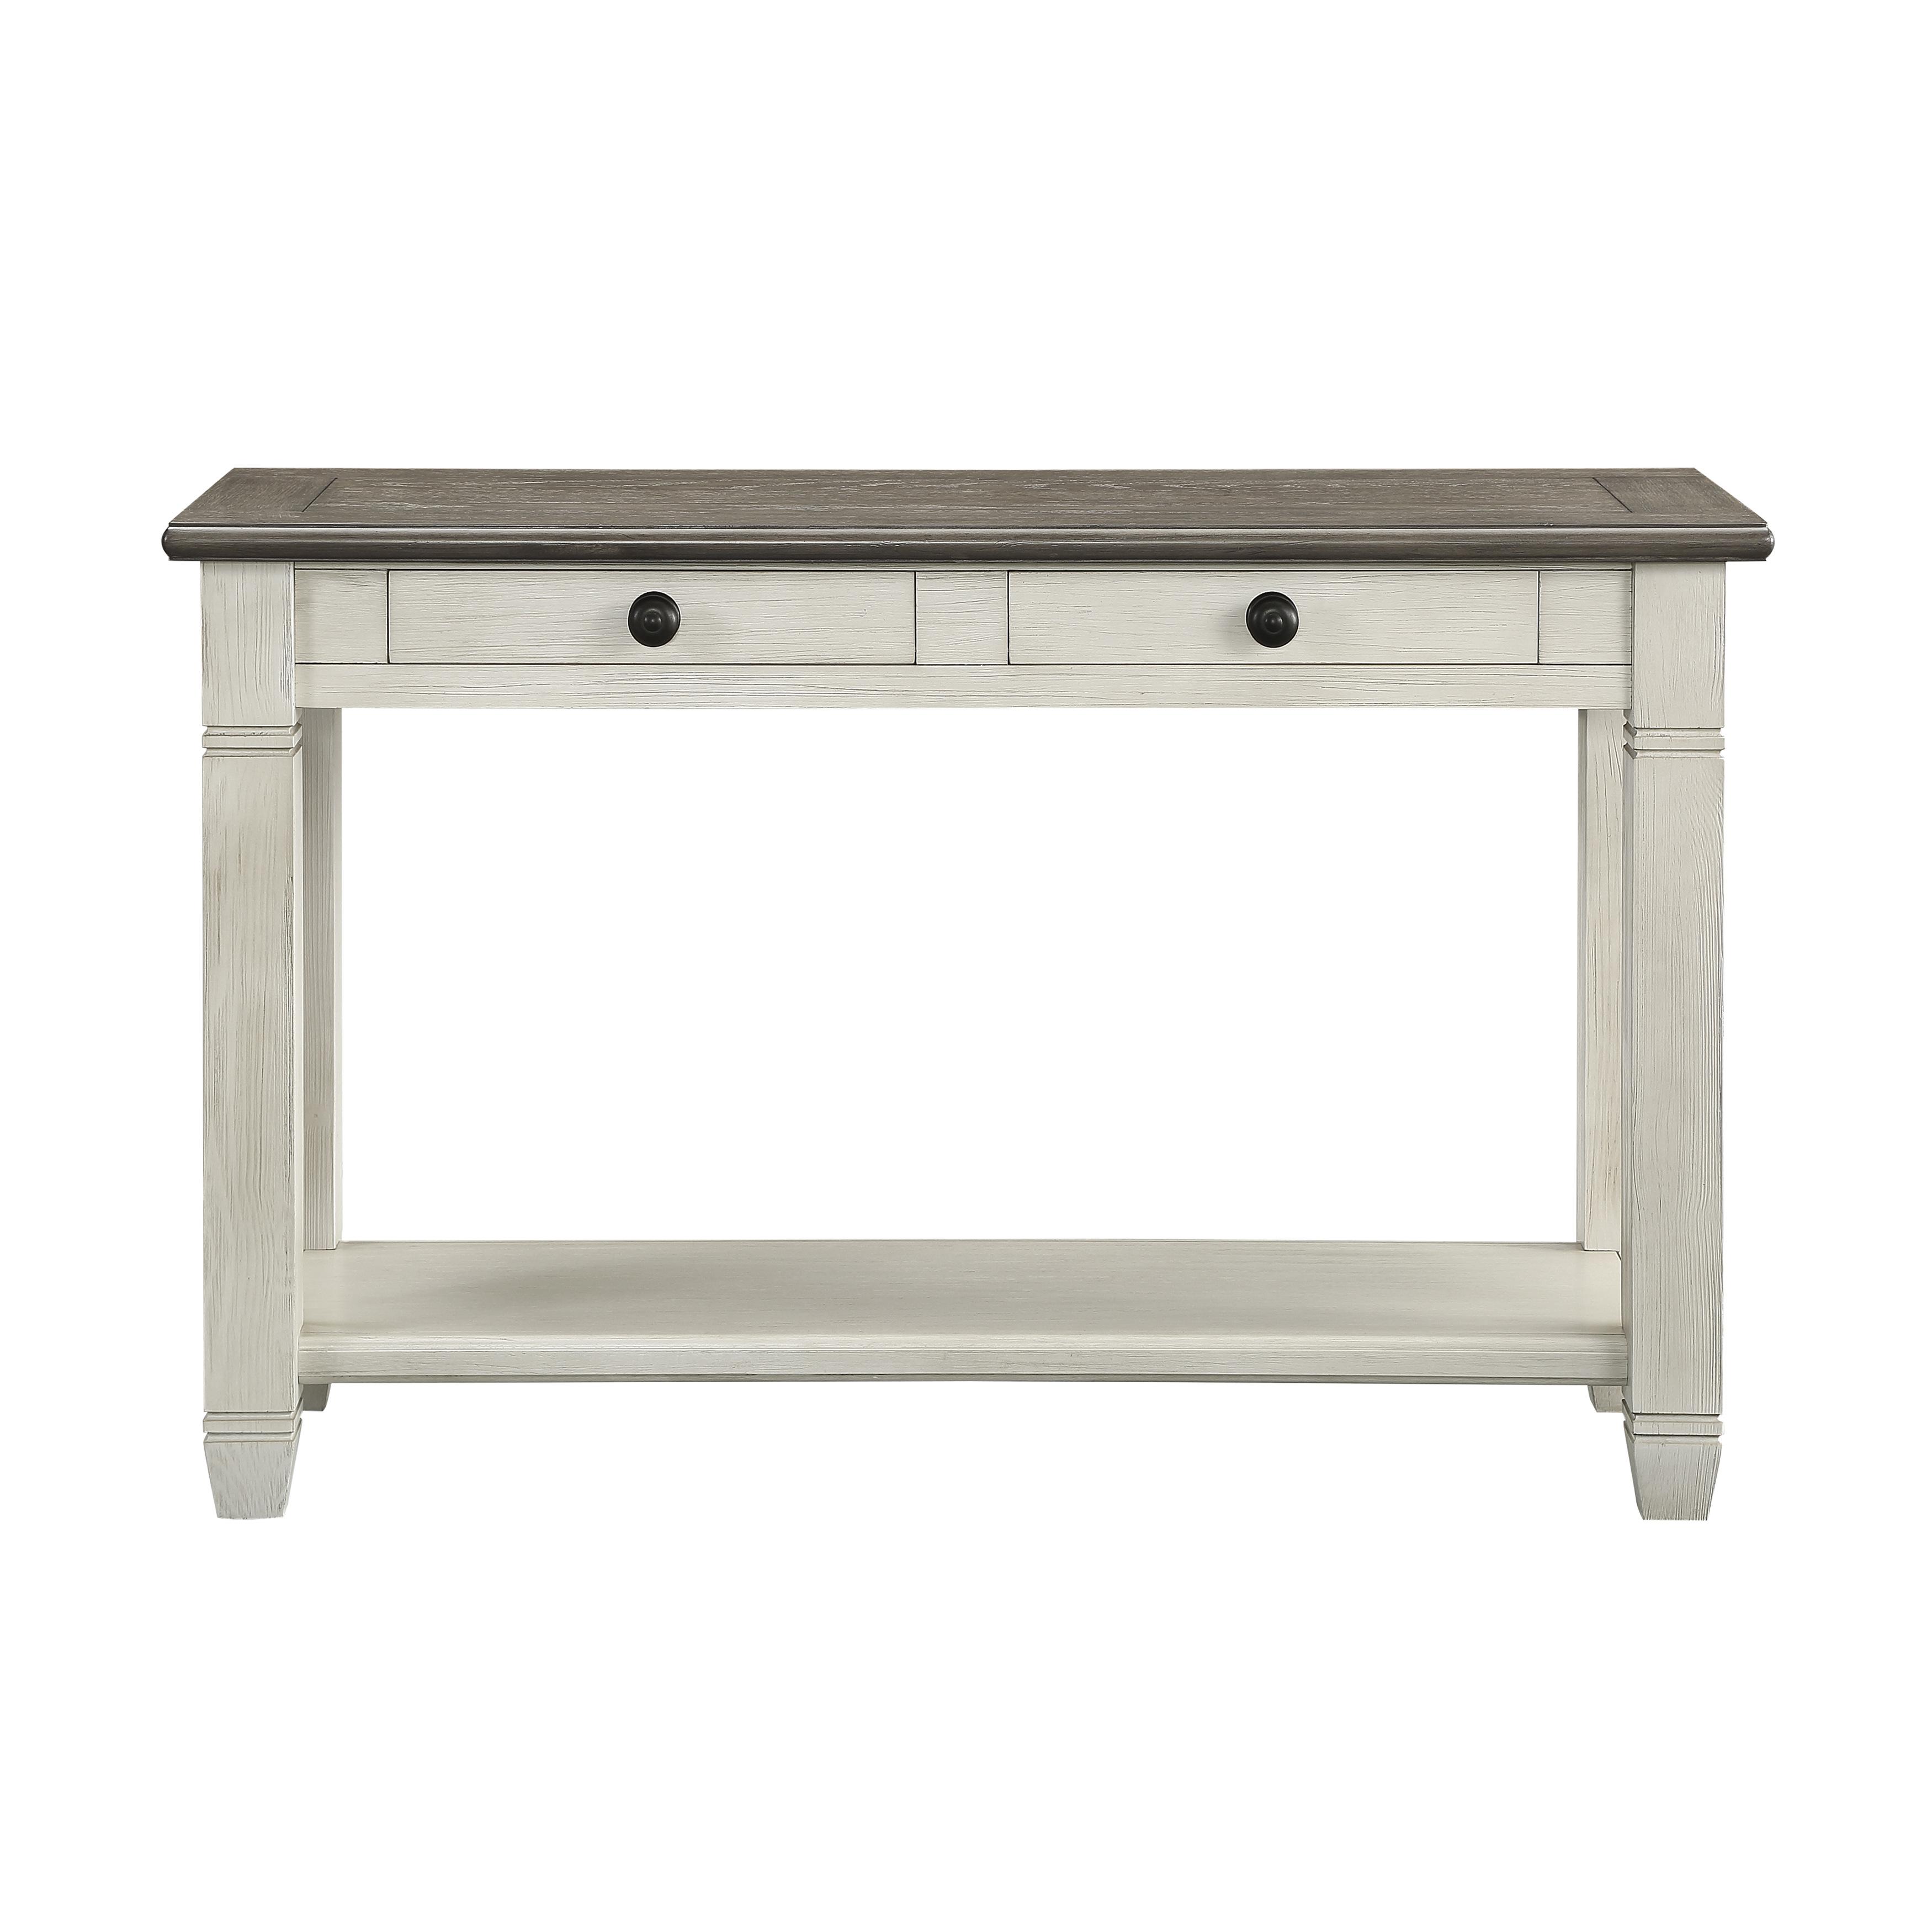 Cottage Sofa Table 5627NW-05 Granby 5627NW-05 in Antique White, Brown 